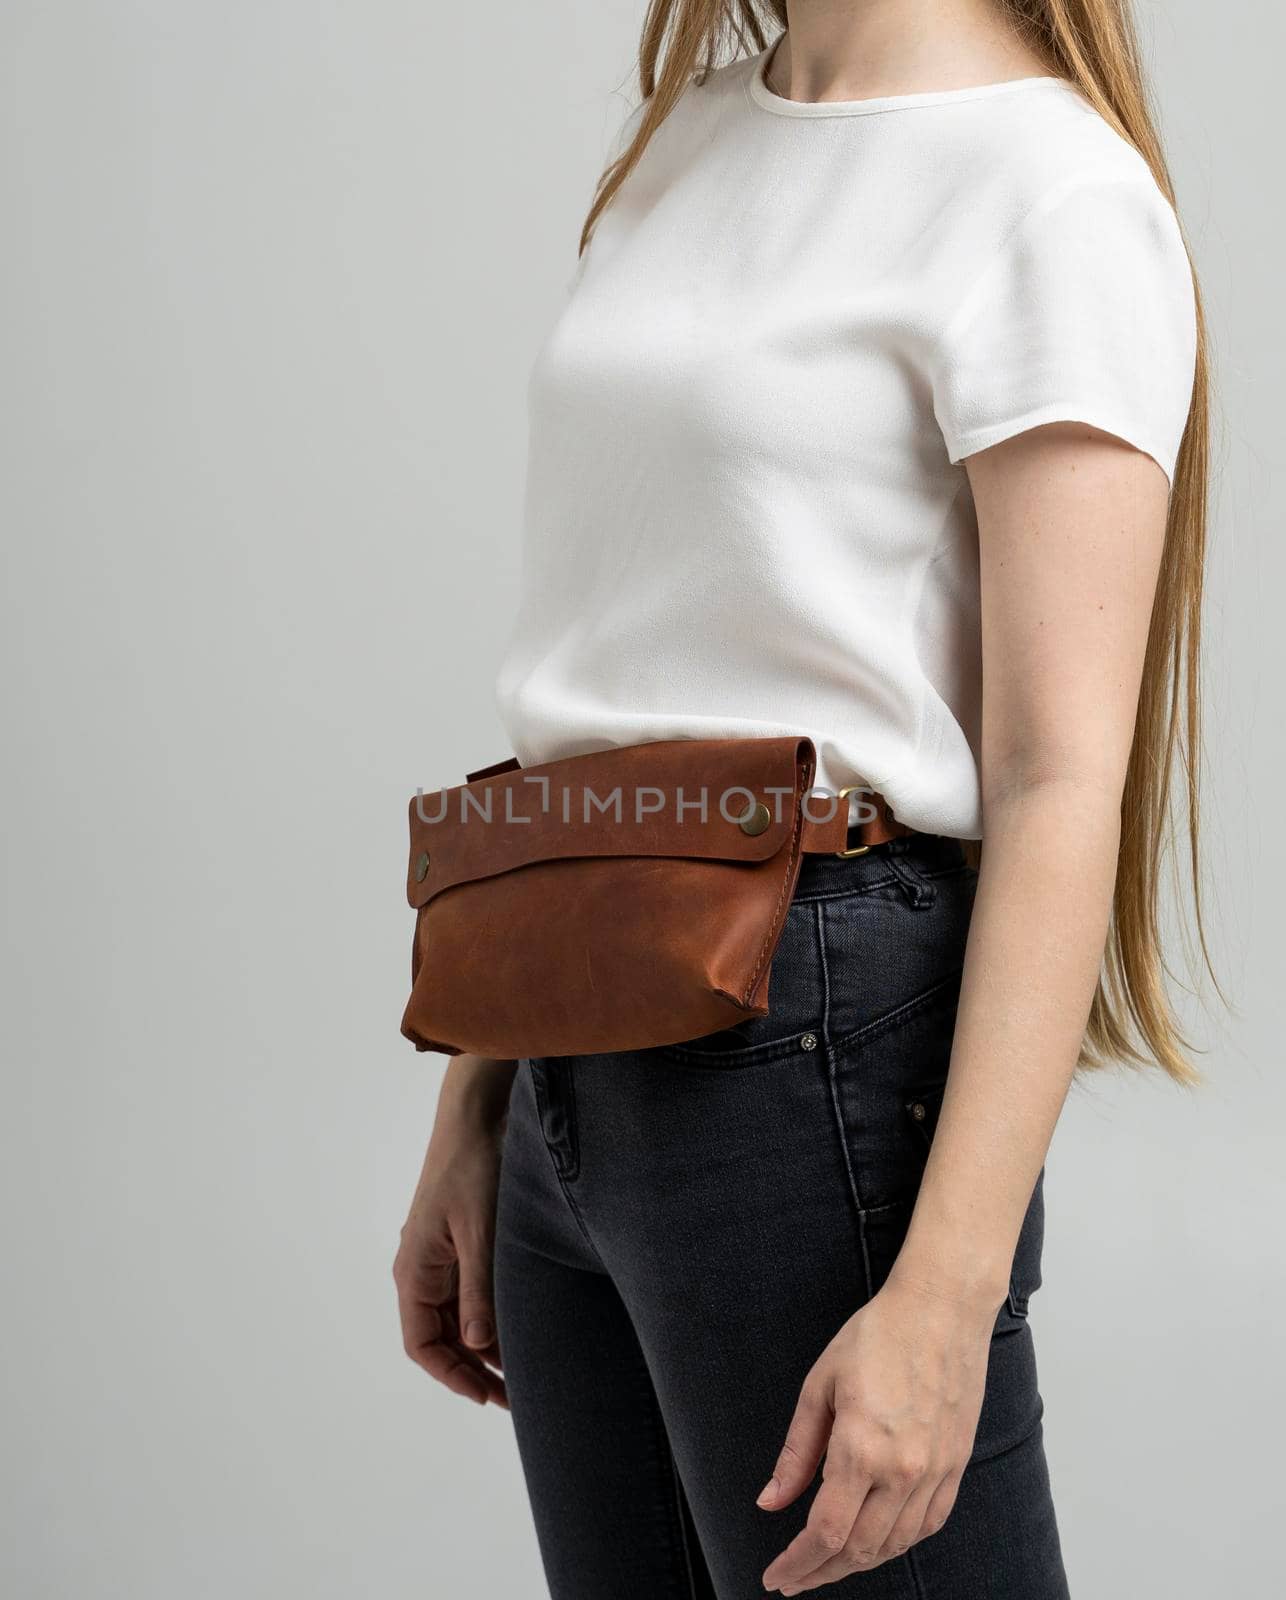 Girl in a white blouse with a leather red handmade bag over her waist. Designer dark brown banana bag. Woman in a studio. Comfortable small bag for walking